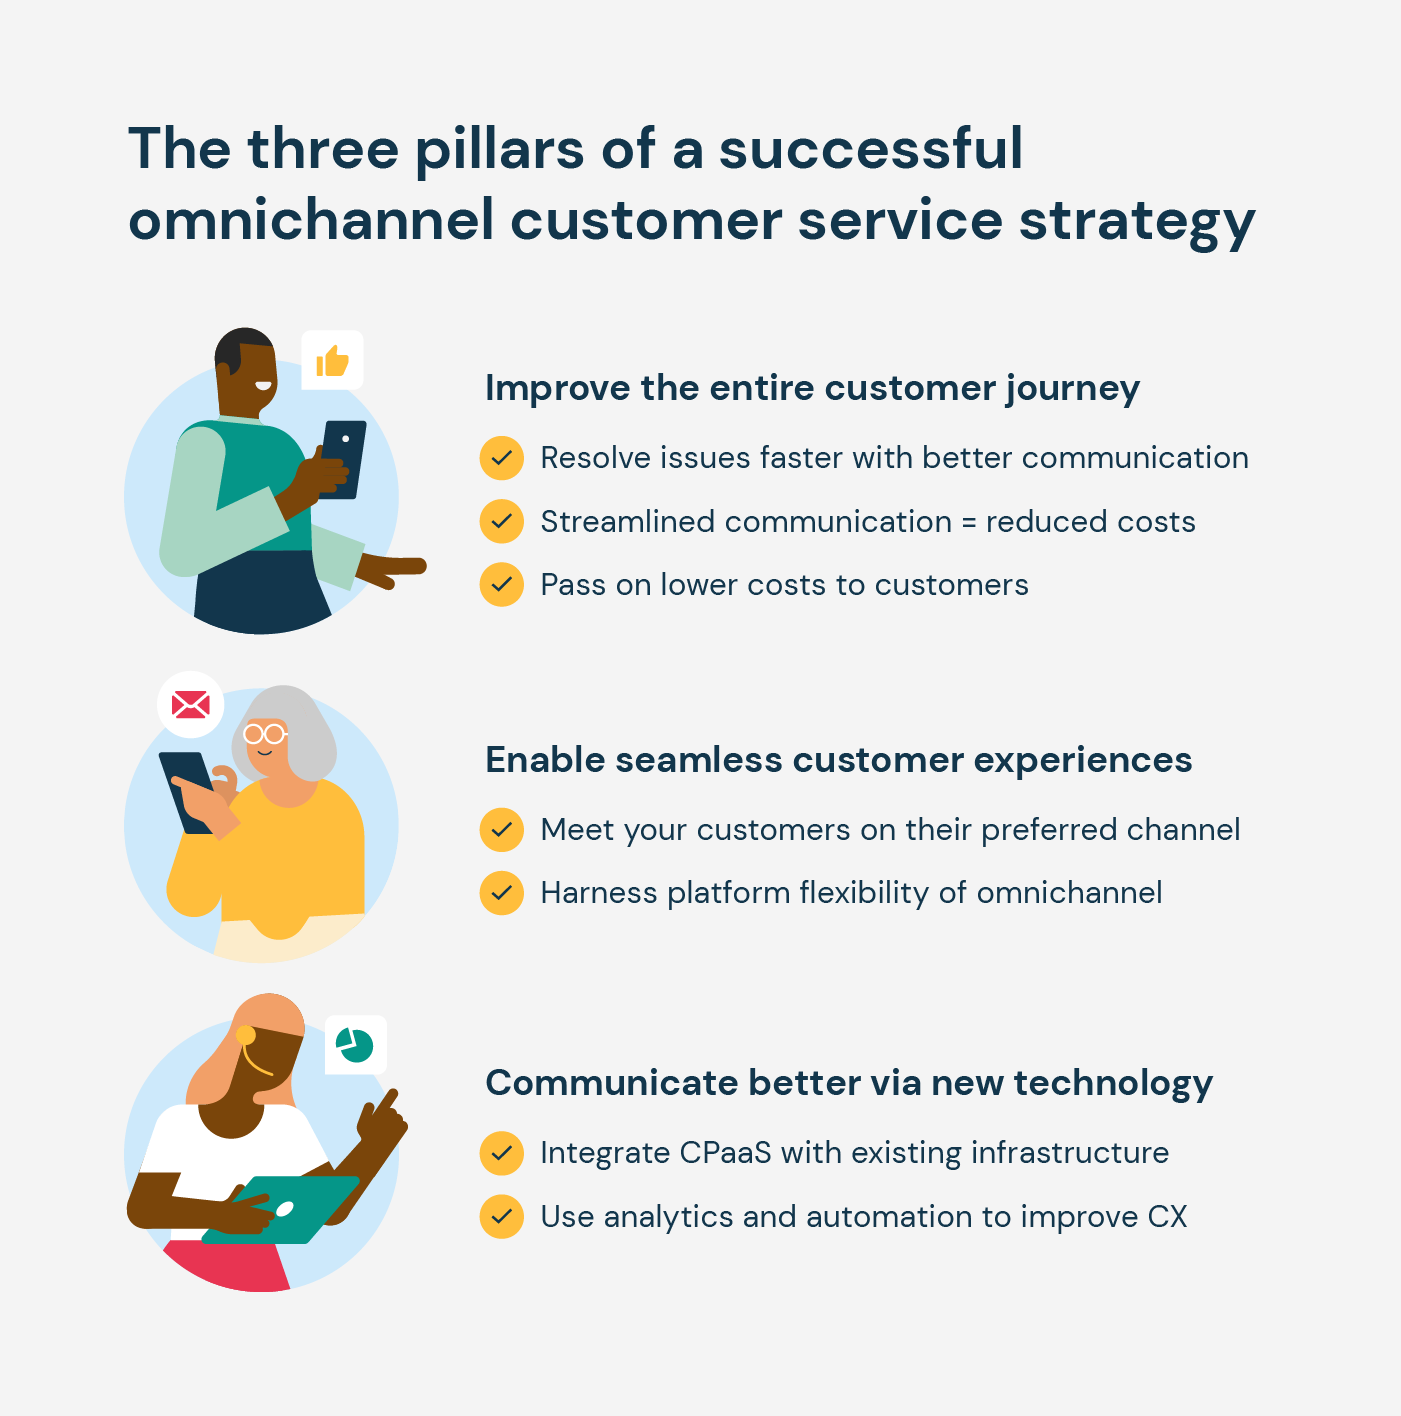 Three pillars of a successful omnichannel customer service strategy 1) Improve the entire customer journey 2) Enable seamless customer experience 3) Communicate better